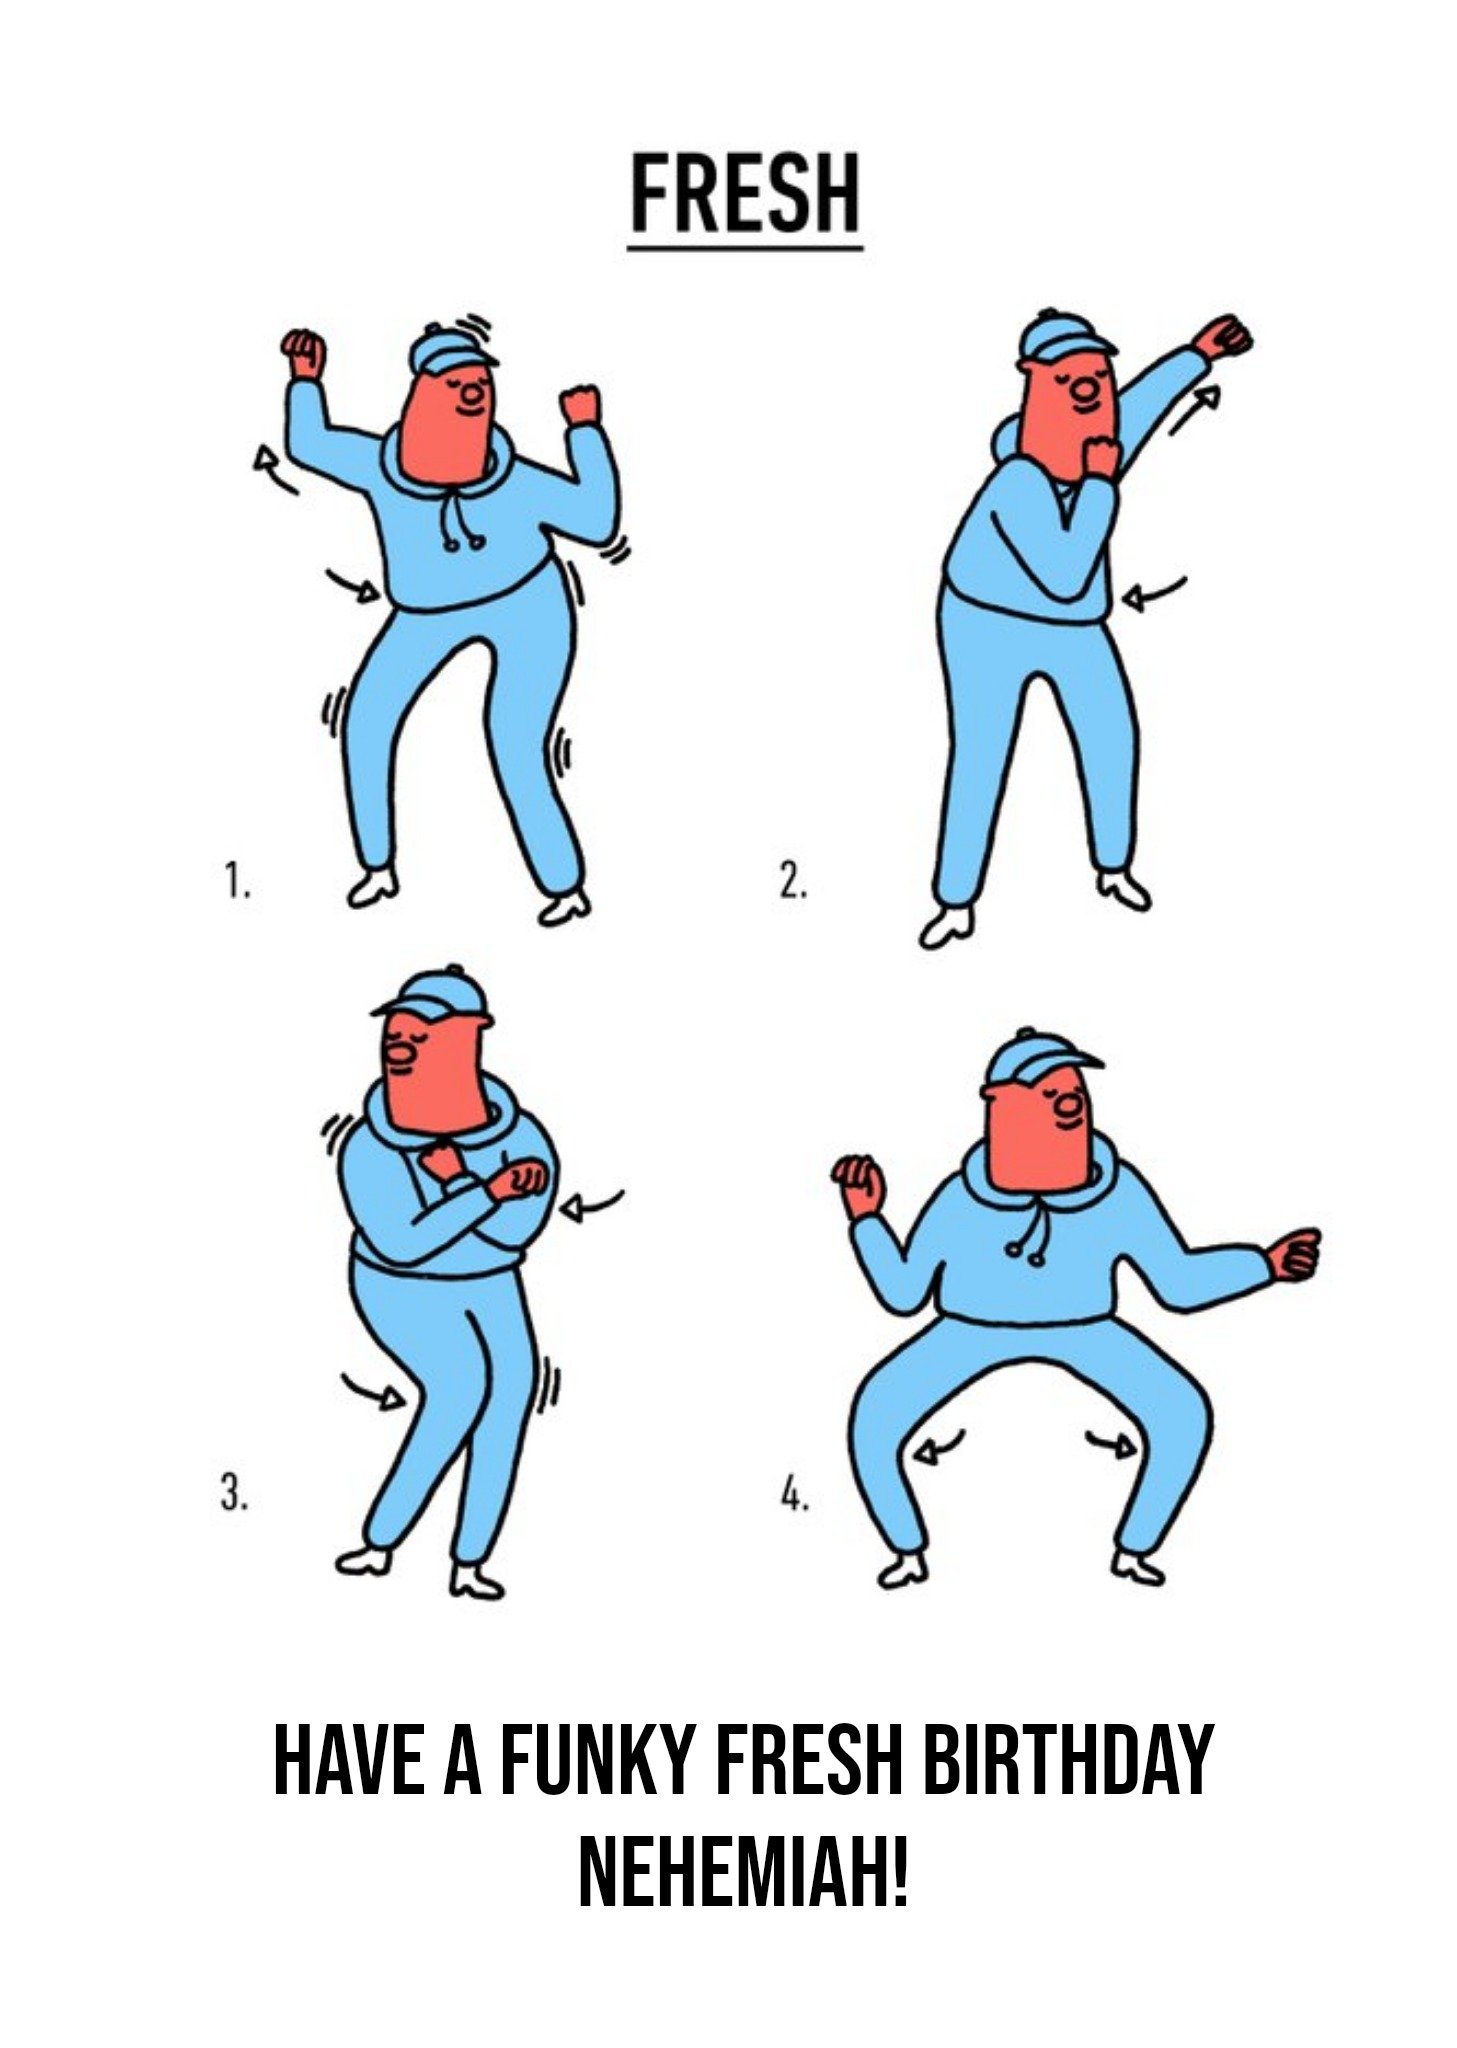 Moonpig Video Game Dance Moves Funky Fresh Birthday Card, Large